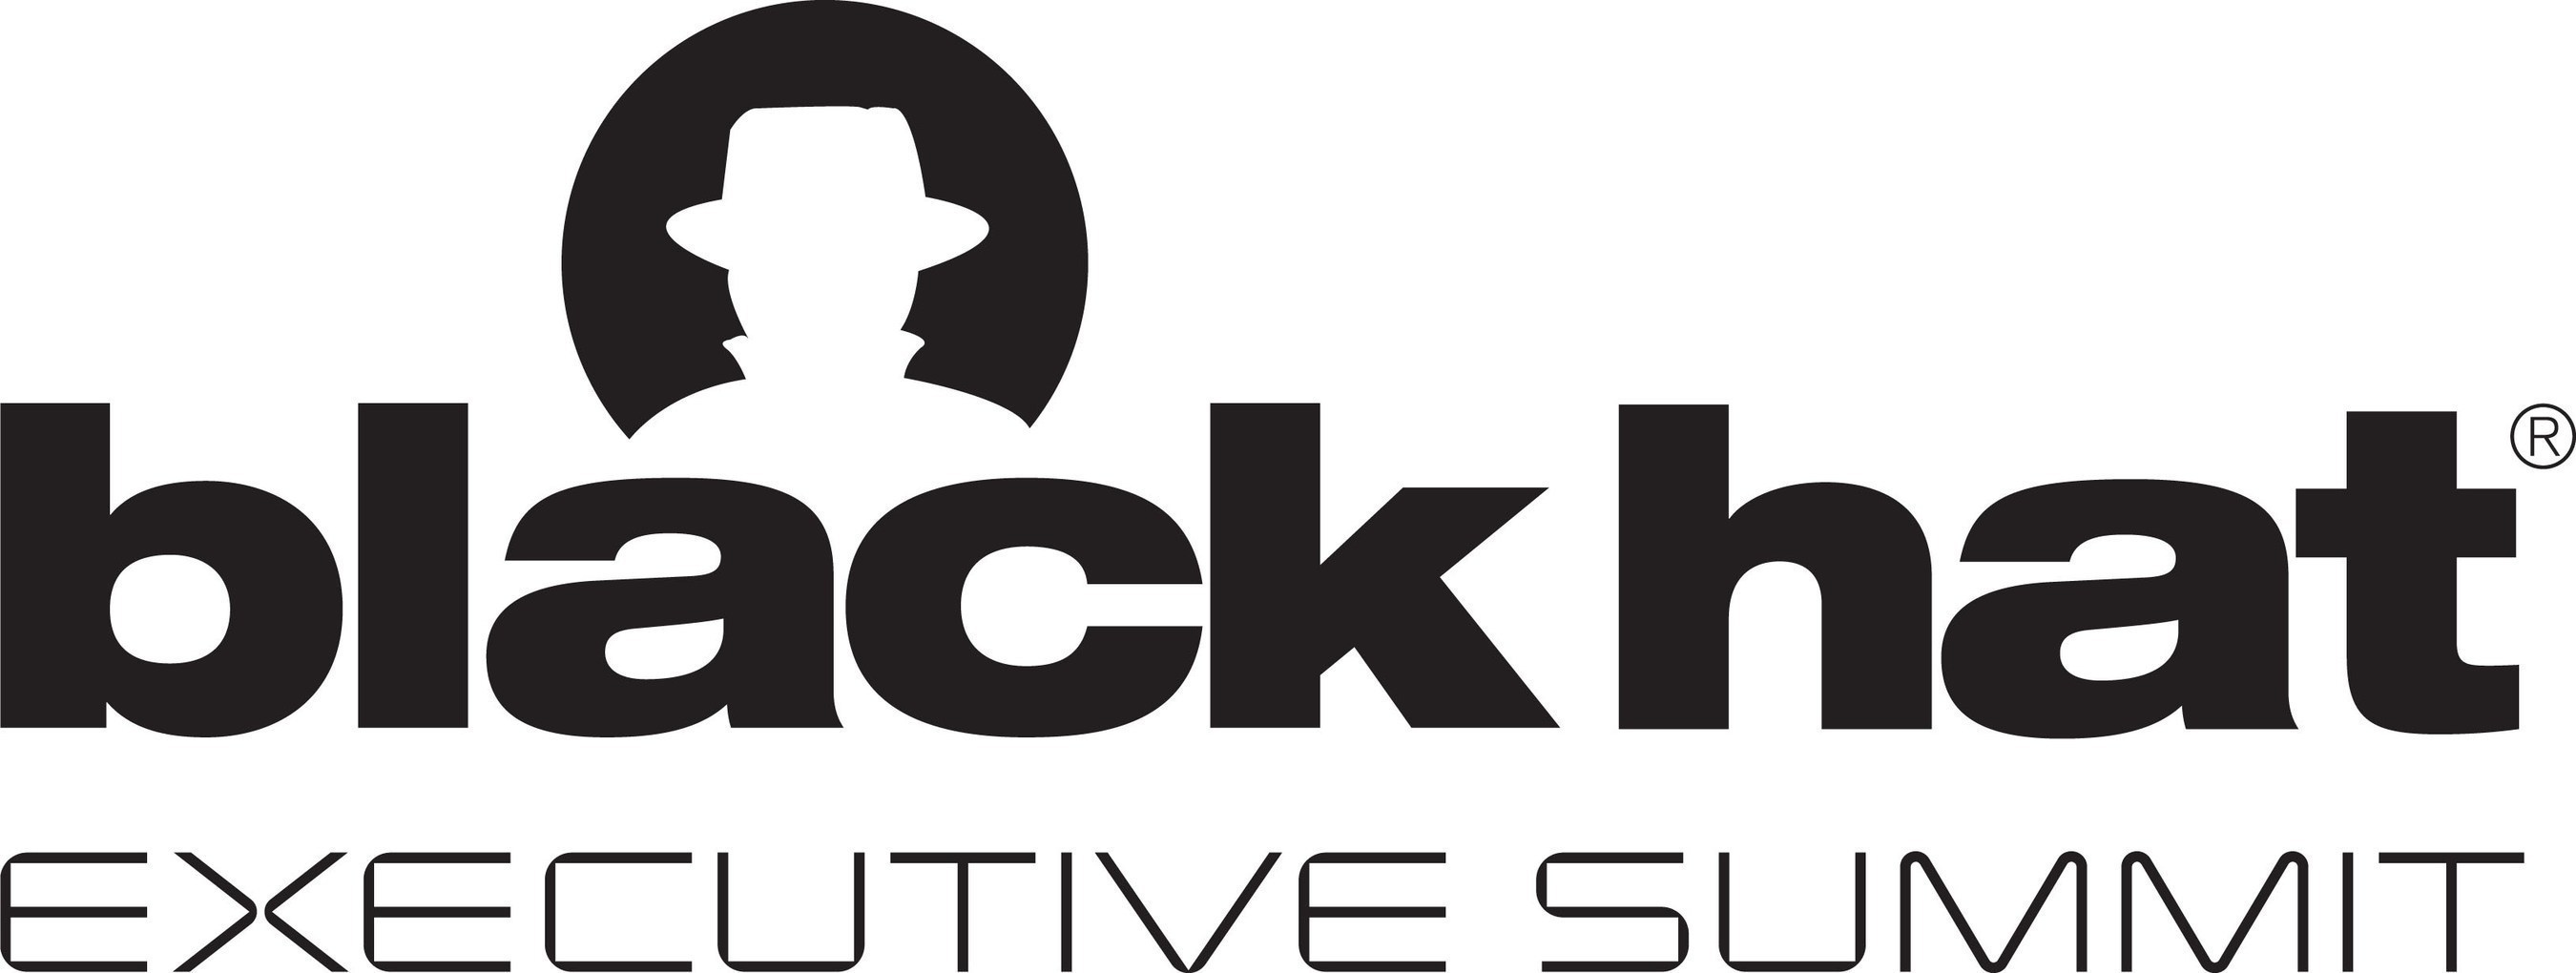 The Black Hat Executive Summit will take place December 8-10, 2015 at the Omni Montelucia Resort in Scottsdale, AZ.